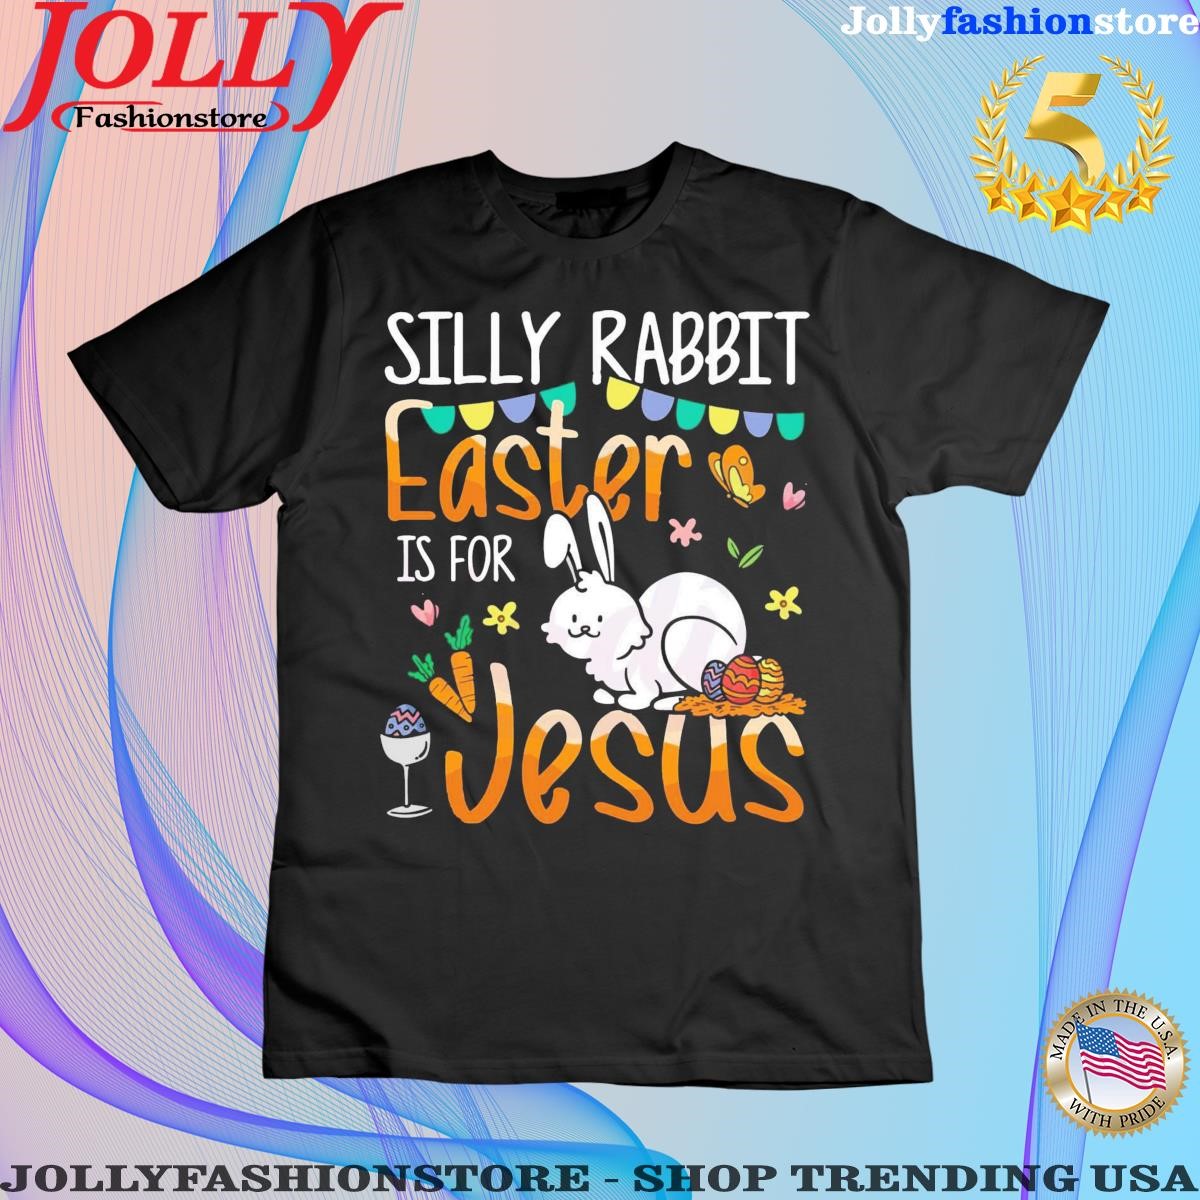 Silly rabbit easter is for Jesus funny bunny easter day shirt women tee shirt.png